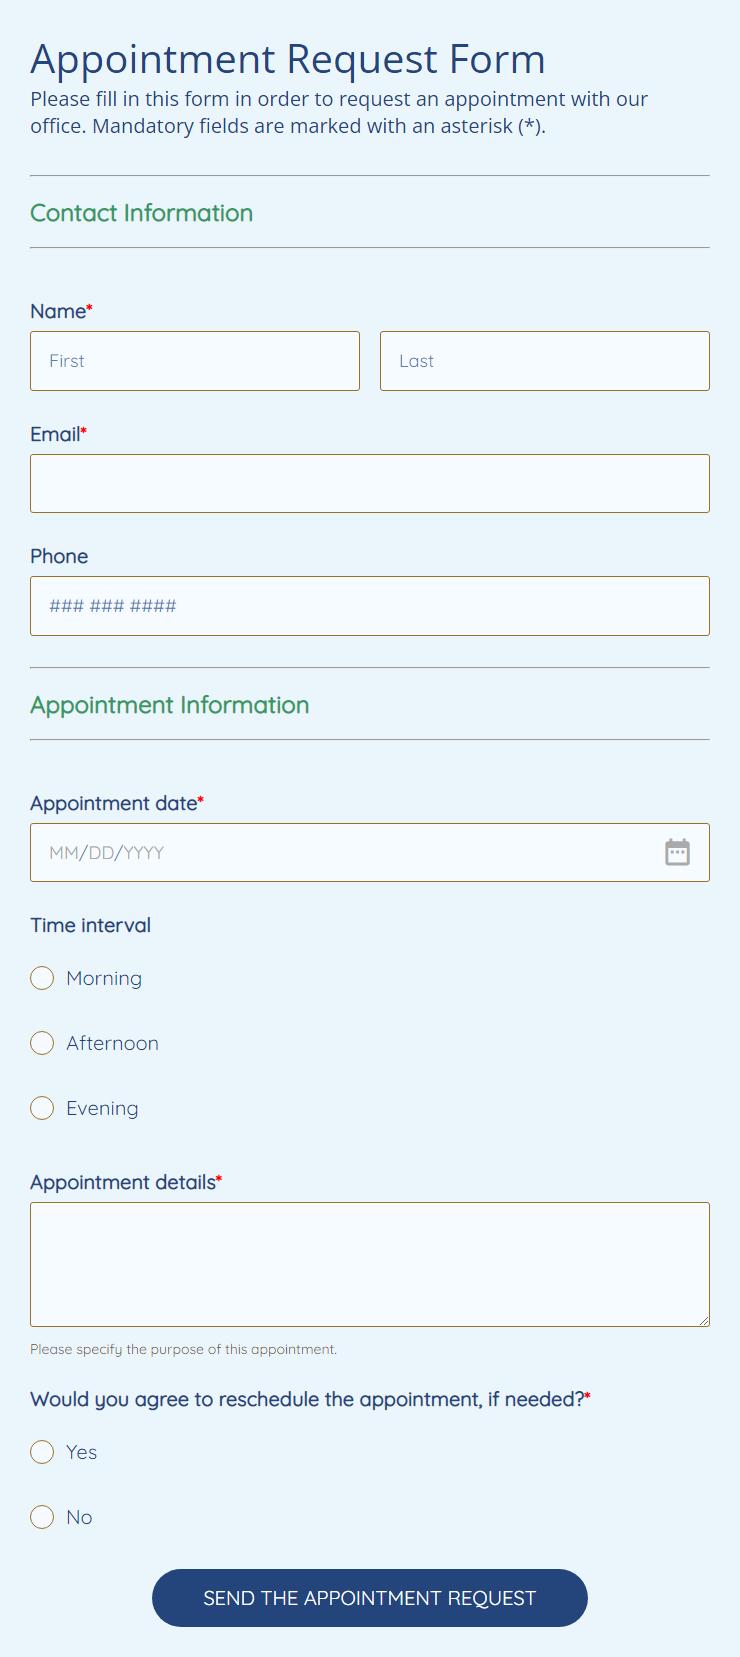 Request for Appointment Form